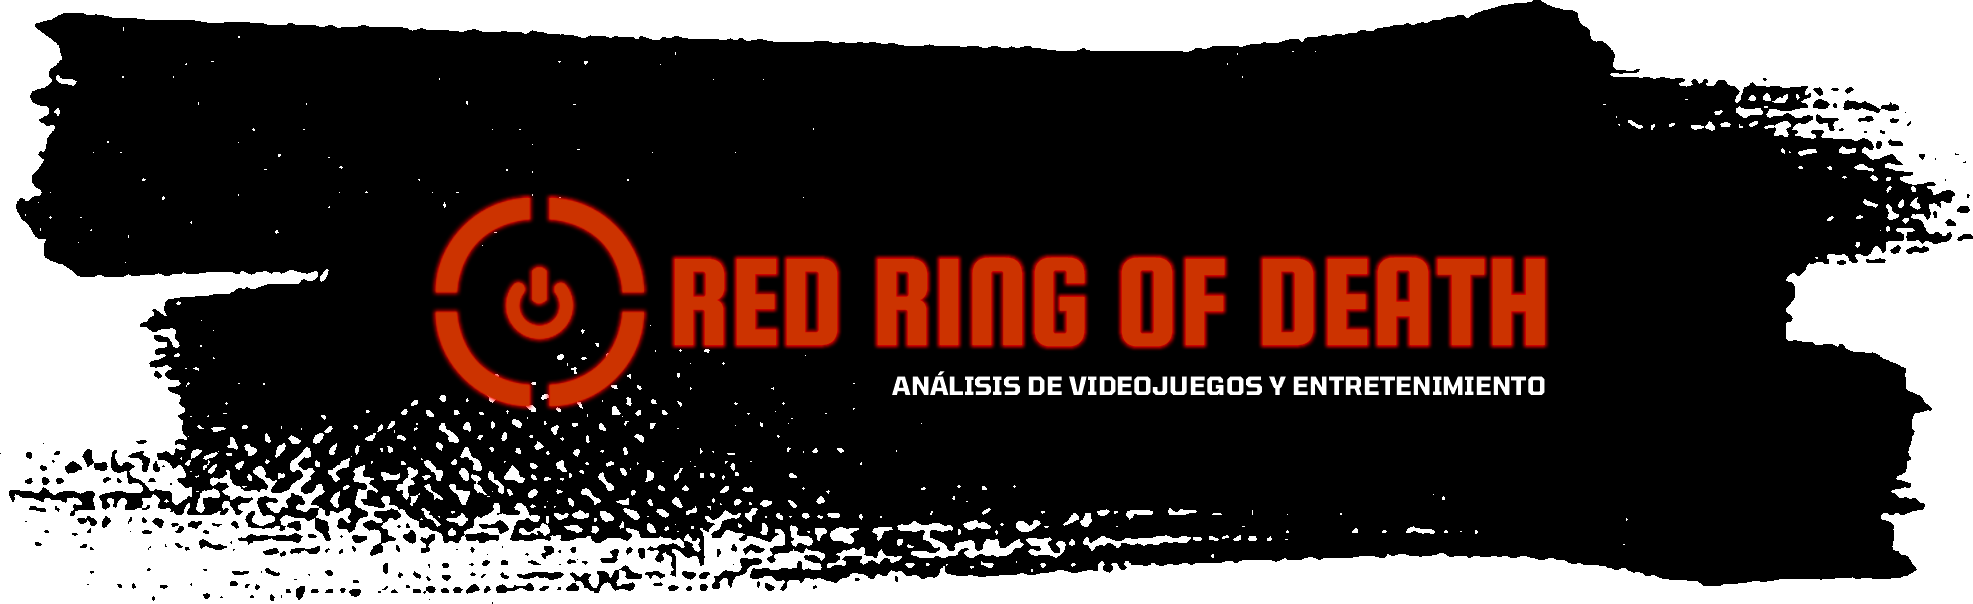 RED RING OF DEATH